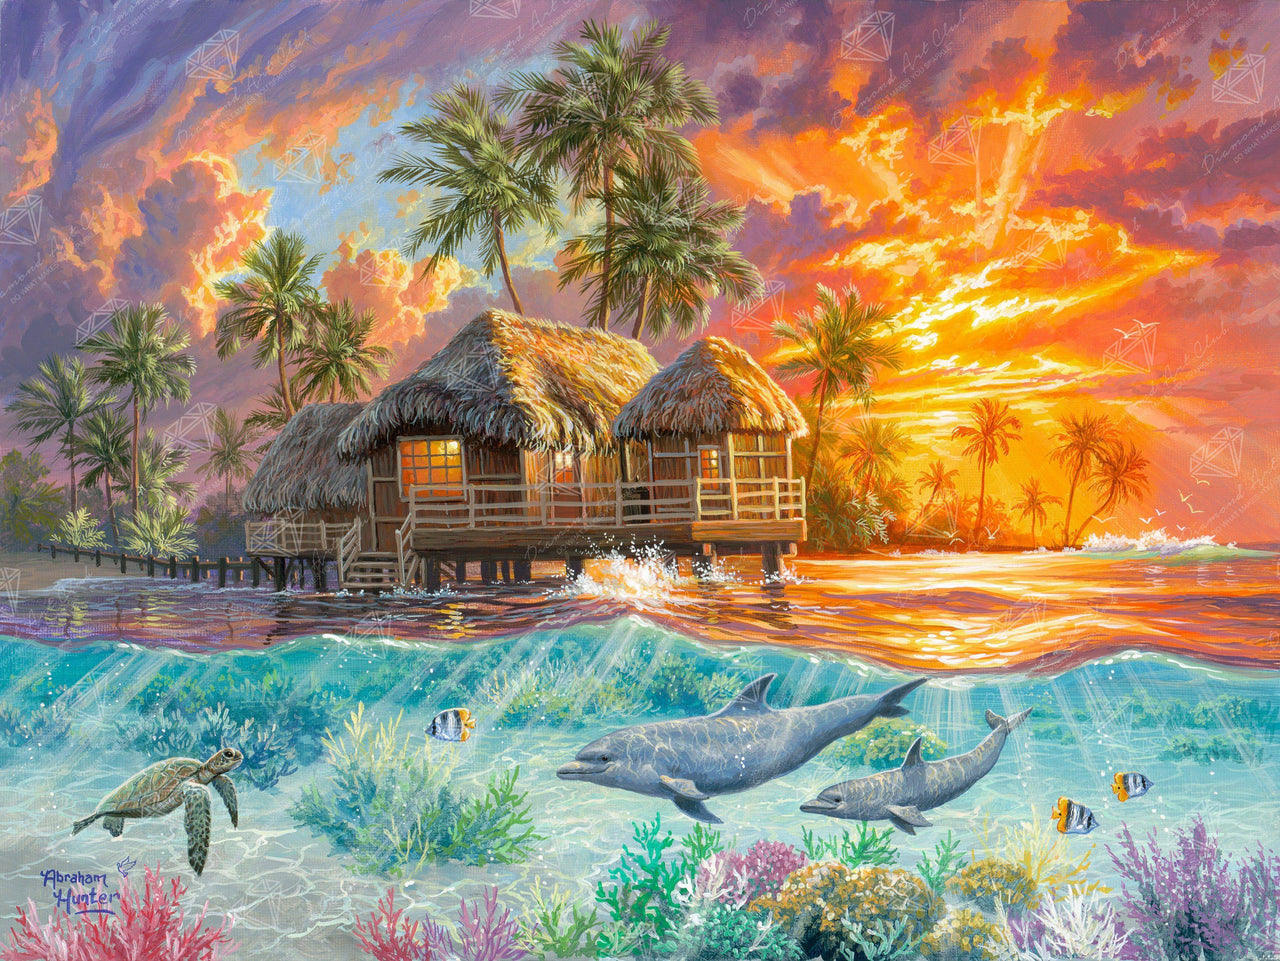 Diamond Painting Weekend In Paradise 36.6" x 27.6″ (93cm x 70cm) / Square with 63 Colors including 4 ABs / 102,213